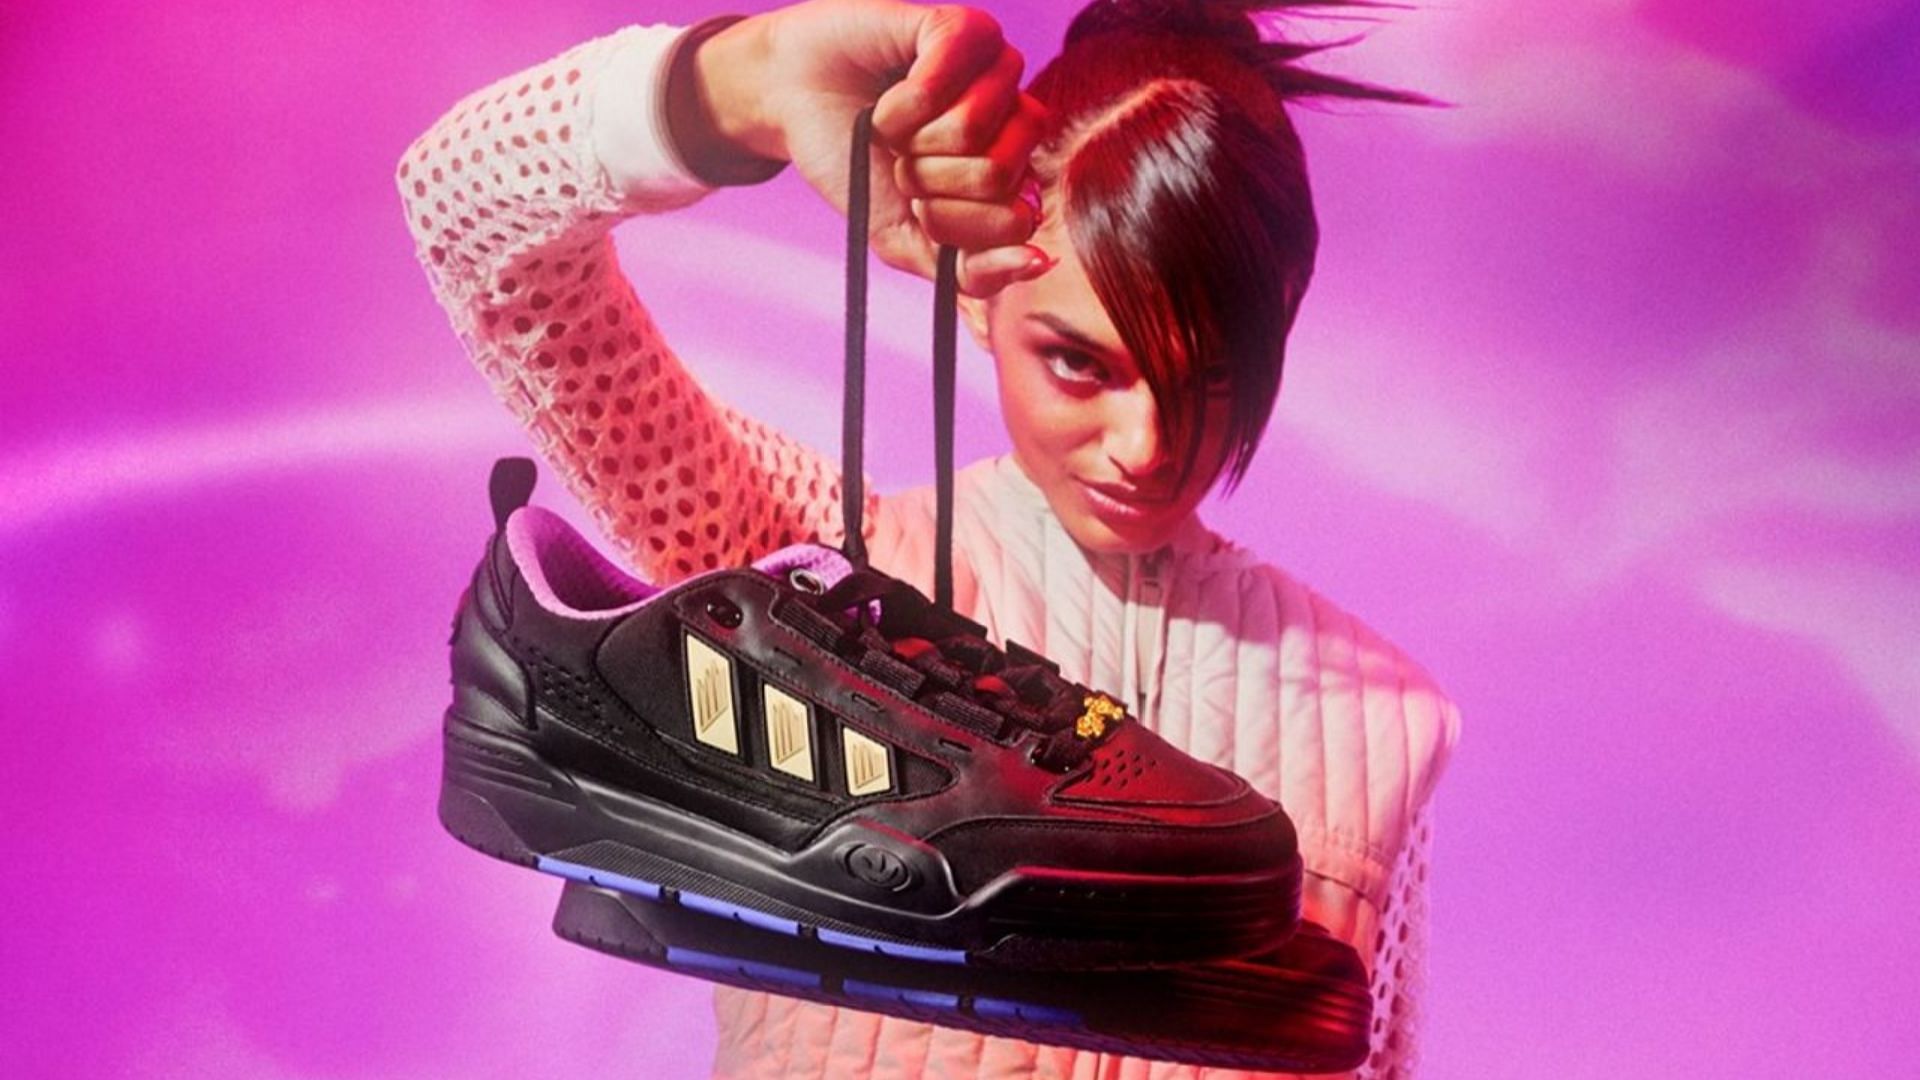 explored Originals buy, price, ADI2000 Where Yu-Gi-Oh and to release x more date, Adidas sneakers: